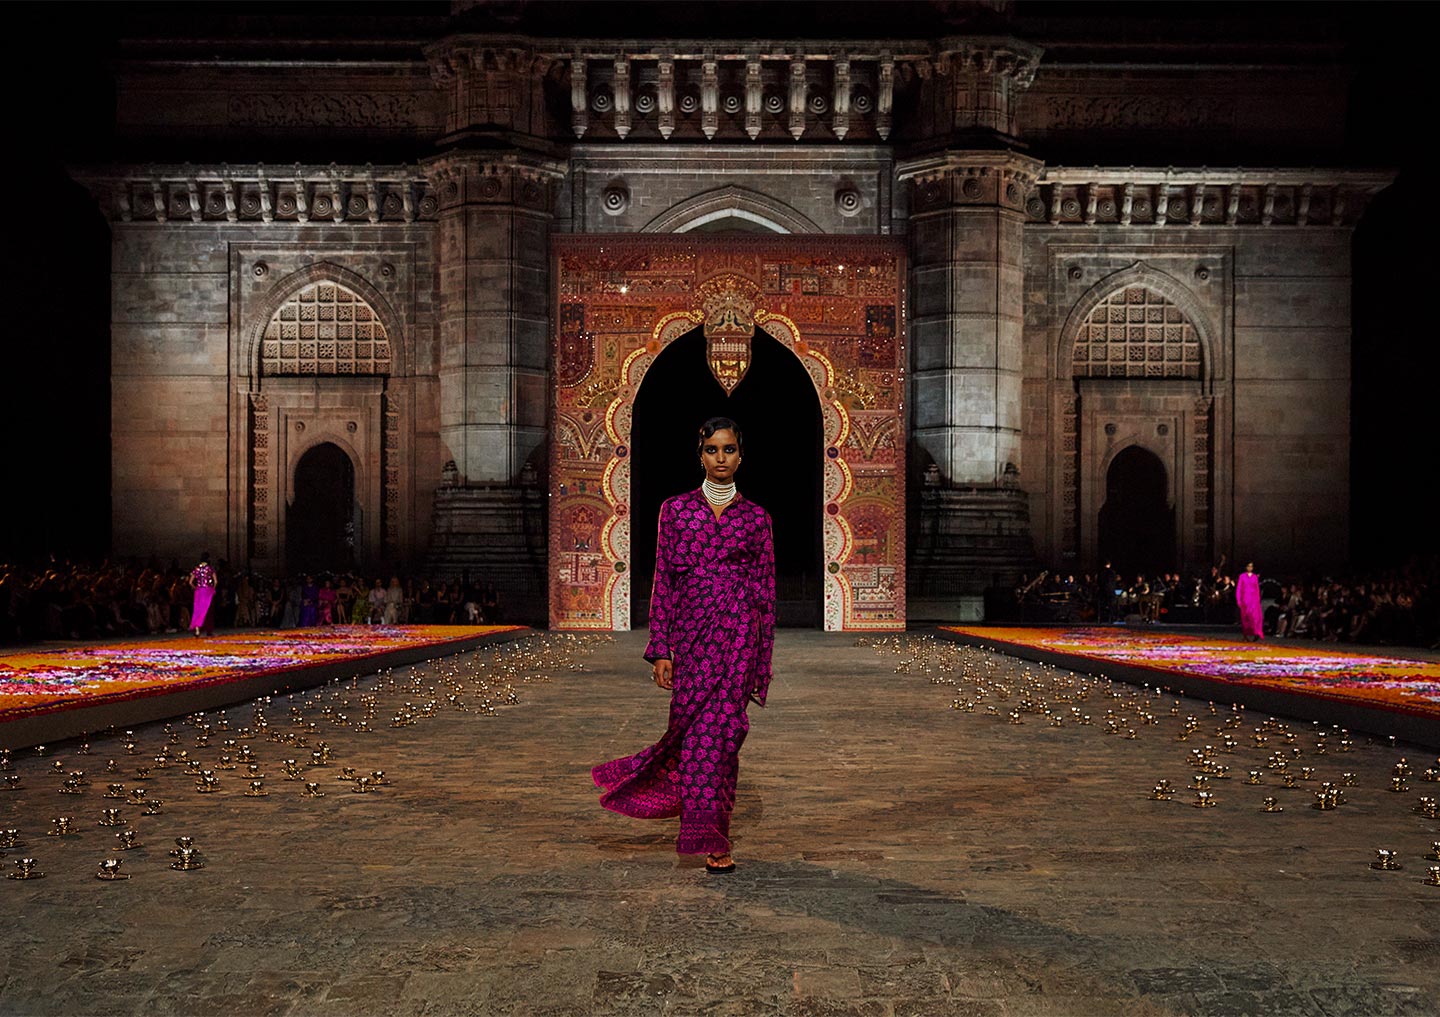 One of the pieces specially produced for Maria Grazia Chiuri's Dior Fall 23 fashion show in Mumbai involved the use of an artisanal technique that traces its roots in India back millennia - block printing. Courtesy of Dior